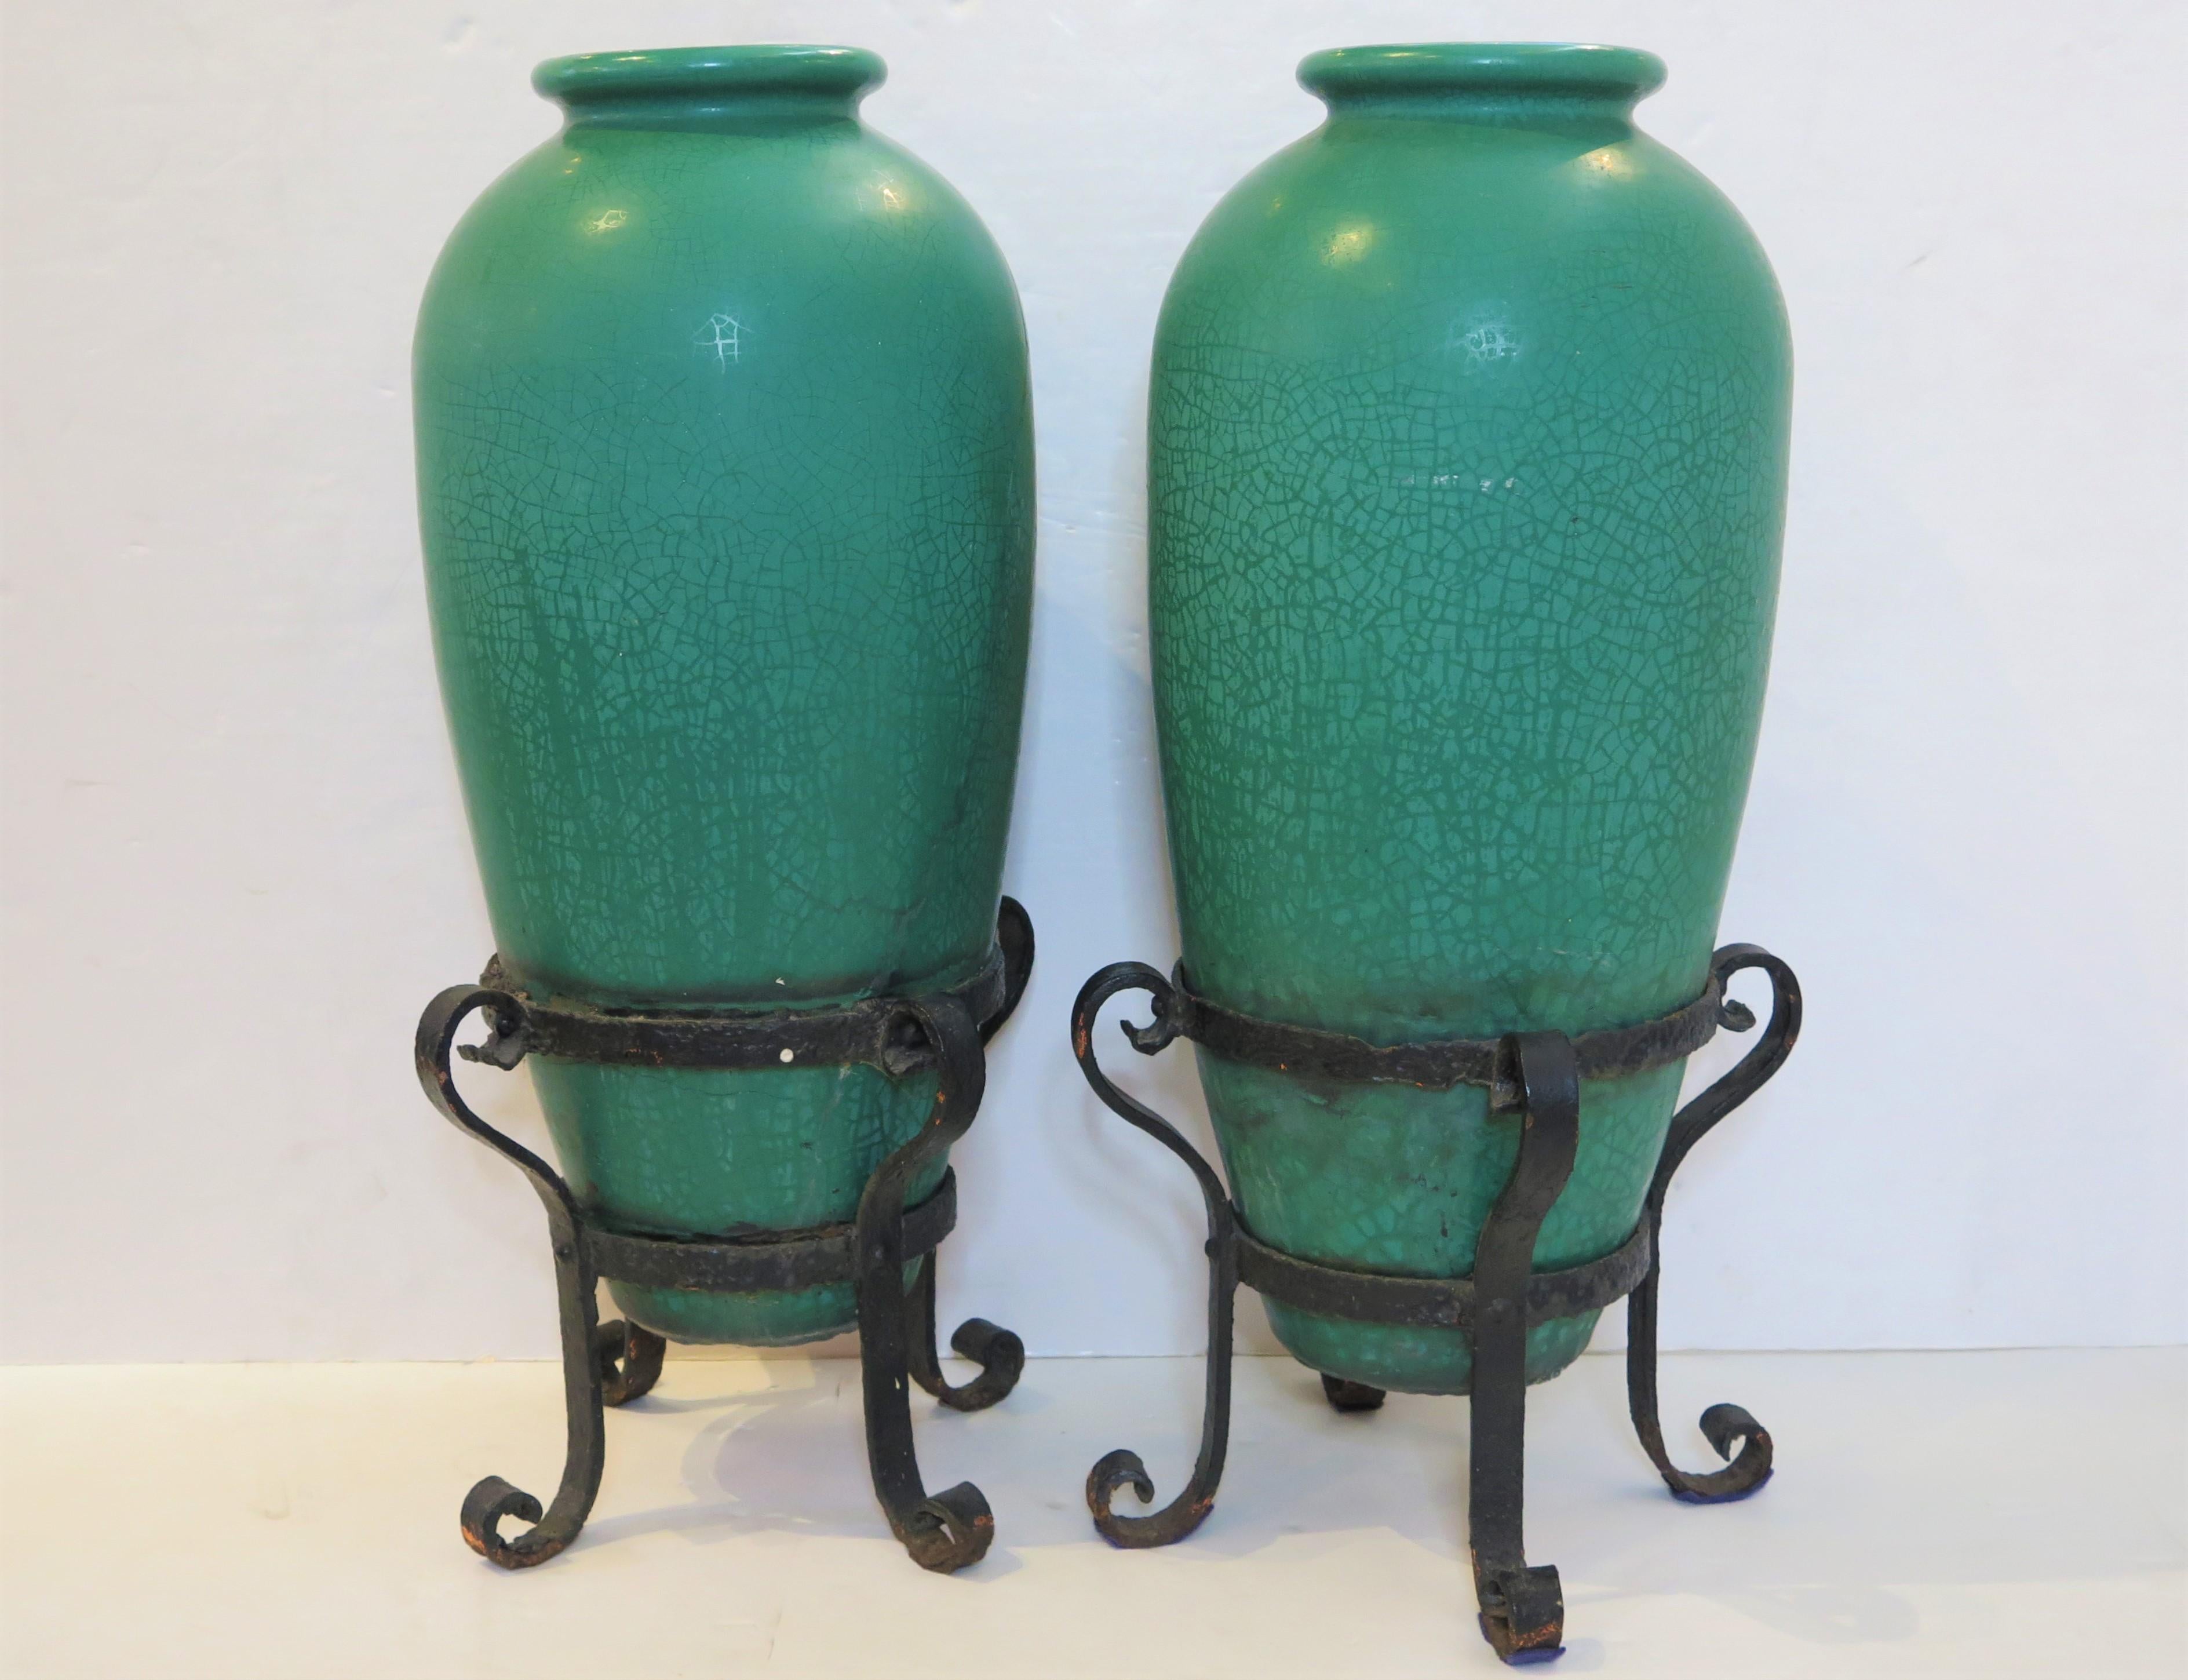 a gorgeous pair of tall, slender Arts and Crafts / Mission-style Galloway Pottery crackled glaze urns in blue-green / turquoise with handsome wrought iron bases / stands, each with hole for drainage, some repairs, United States, 19th